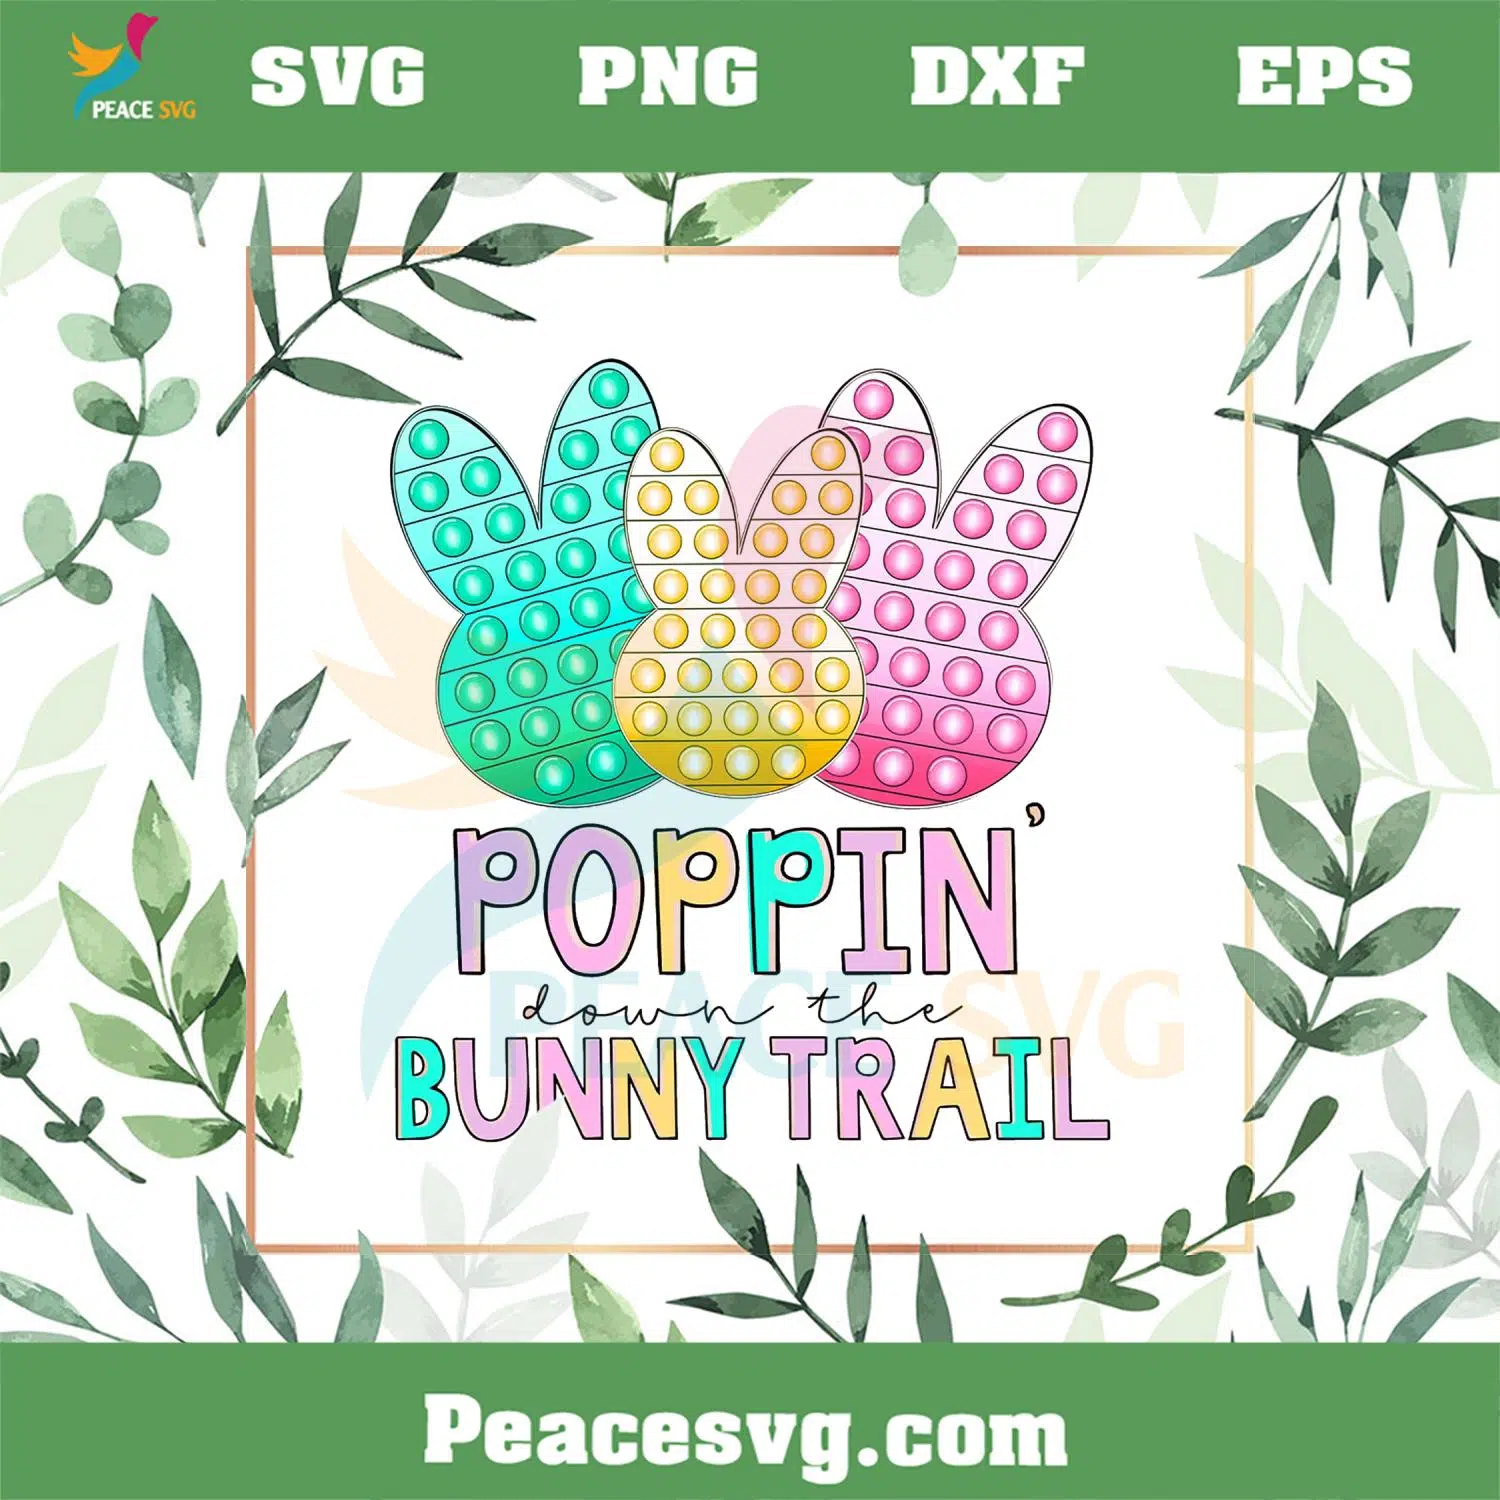 Poppin down The Bunny Trail Funny Easter Peeps SVG Cutting Files